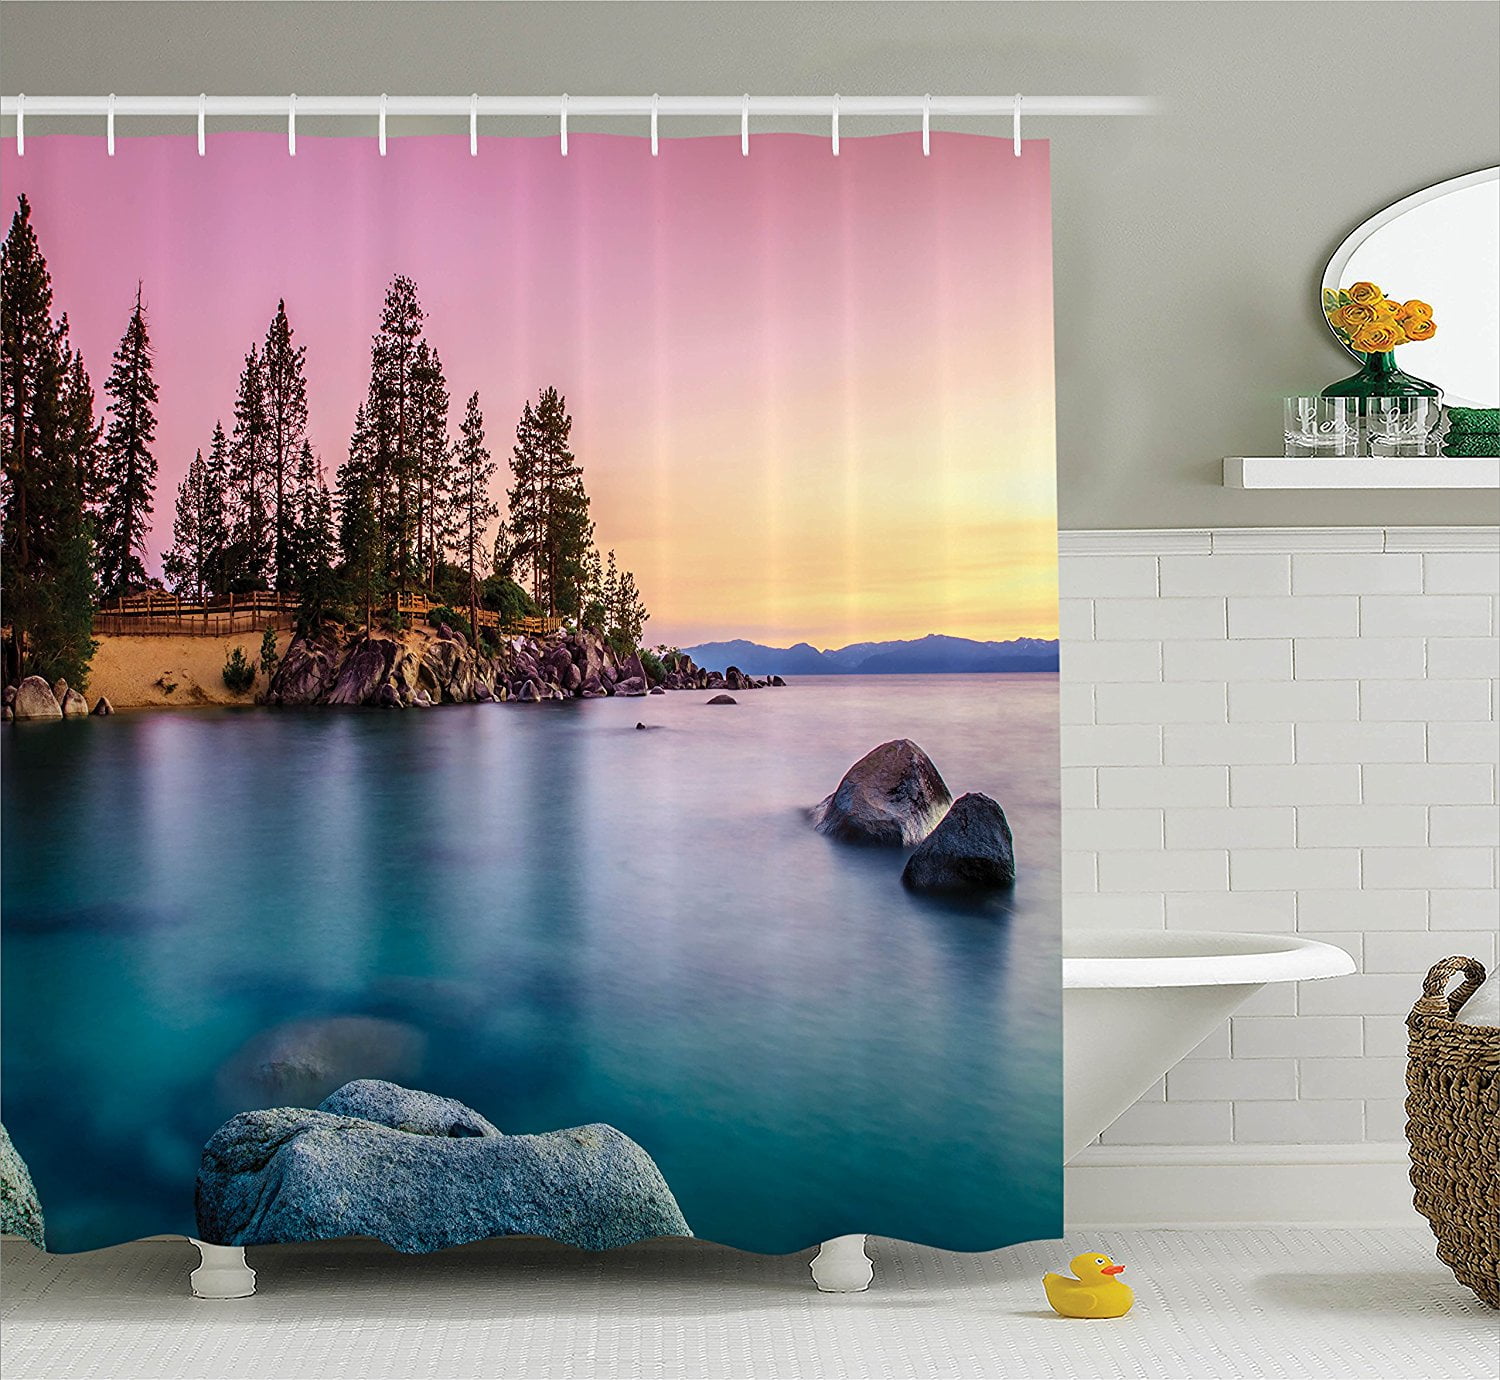 Ocean Decor Fall Wooden Bridge Seasons Lake House Countryside Home Decorative Bathroom Accessories 70.87 x 66.14 Inch Coloranimal Shower Curtain Cllection